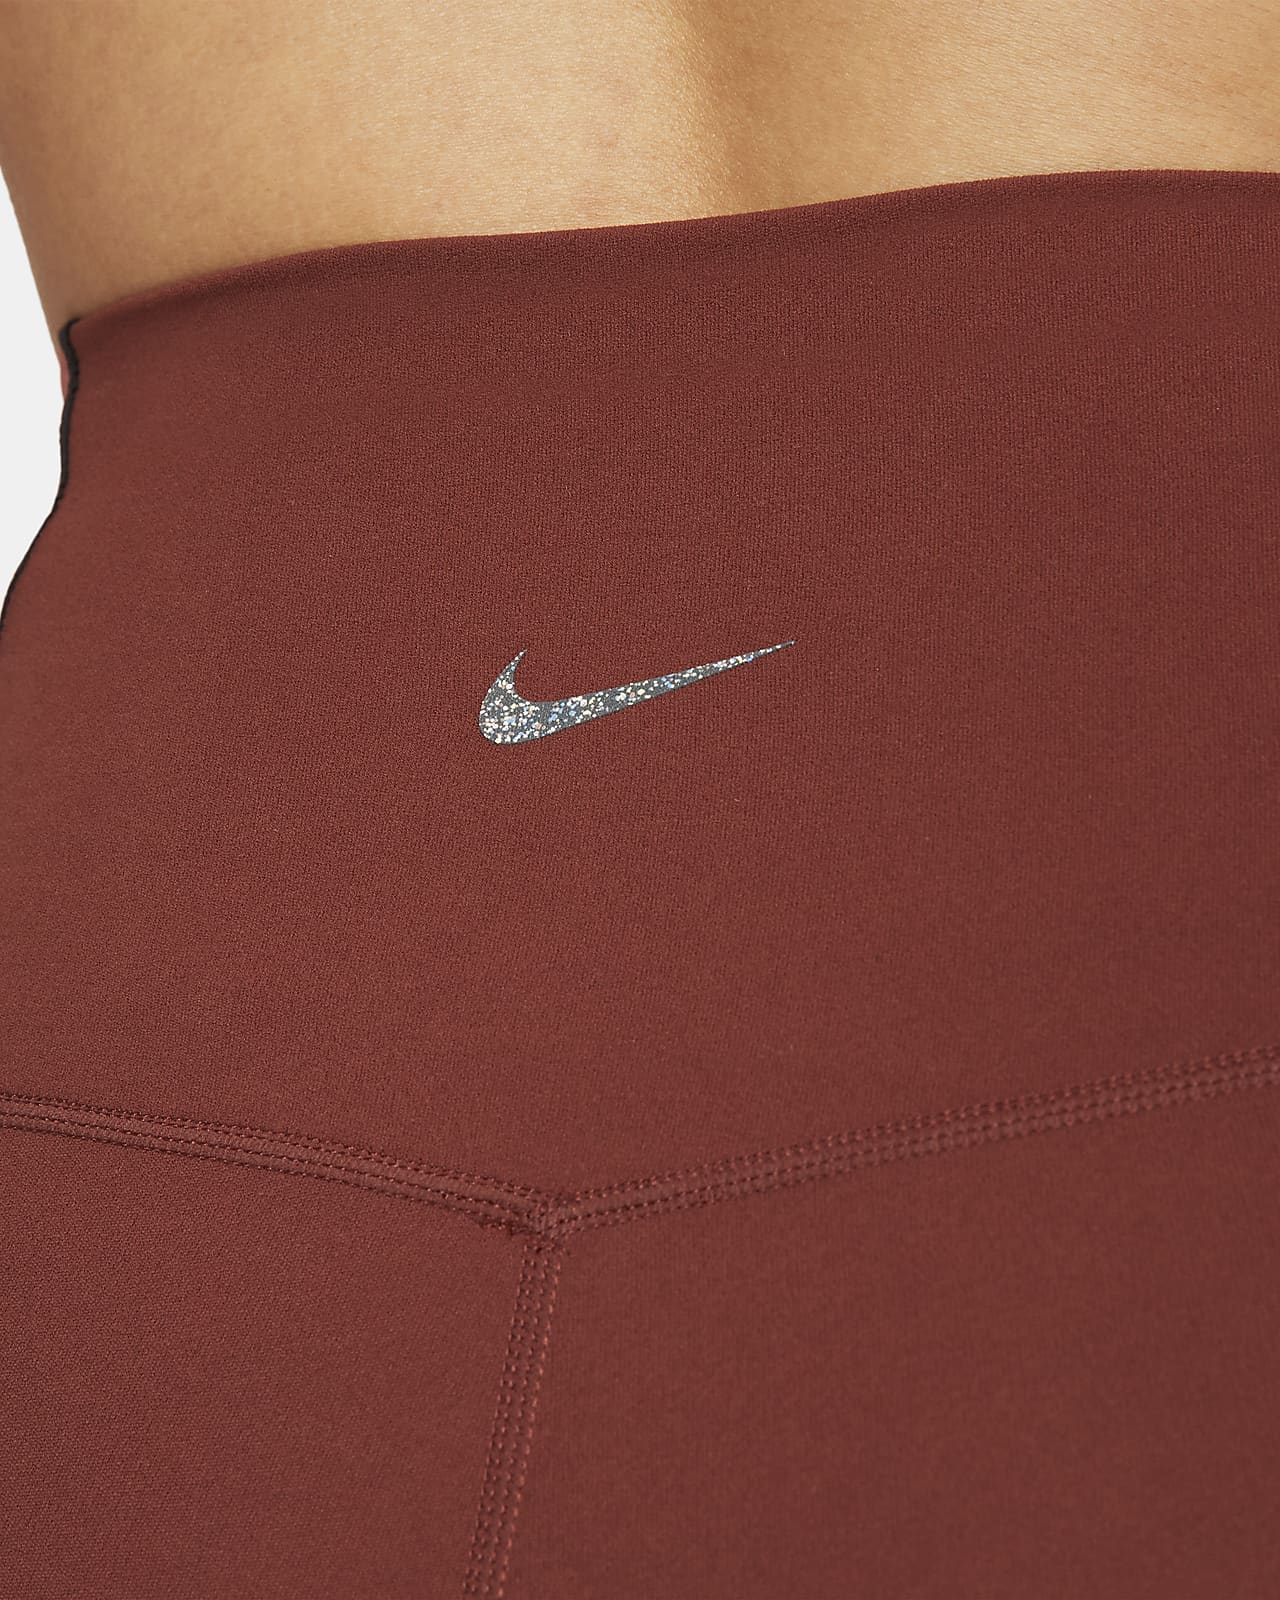 Nike Yoga Dri-FIT Luxe Women's 7/8 High-Rise Color-Block Leggings :  : Clothing, Shoes & Accessories